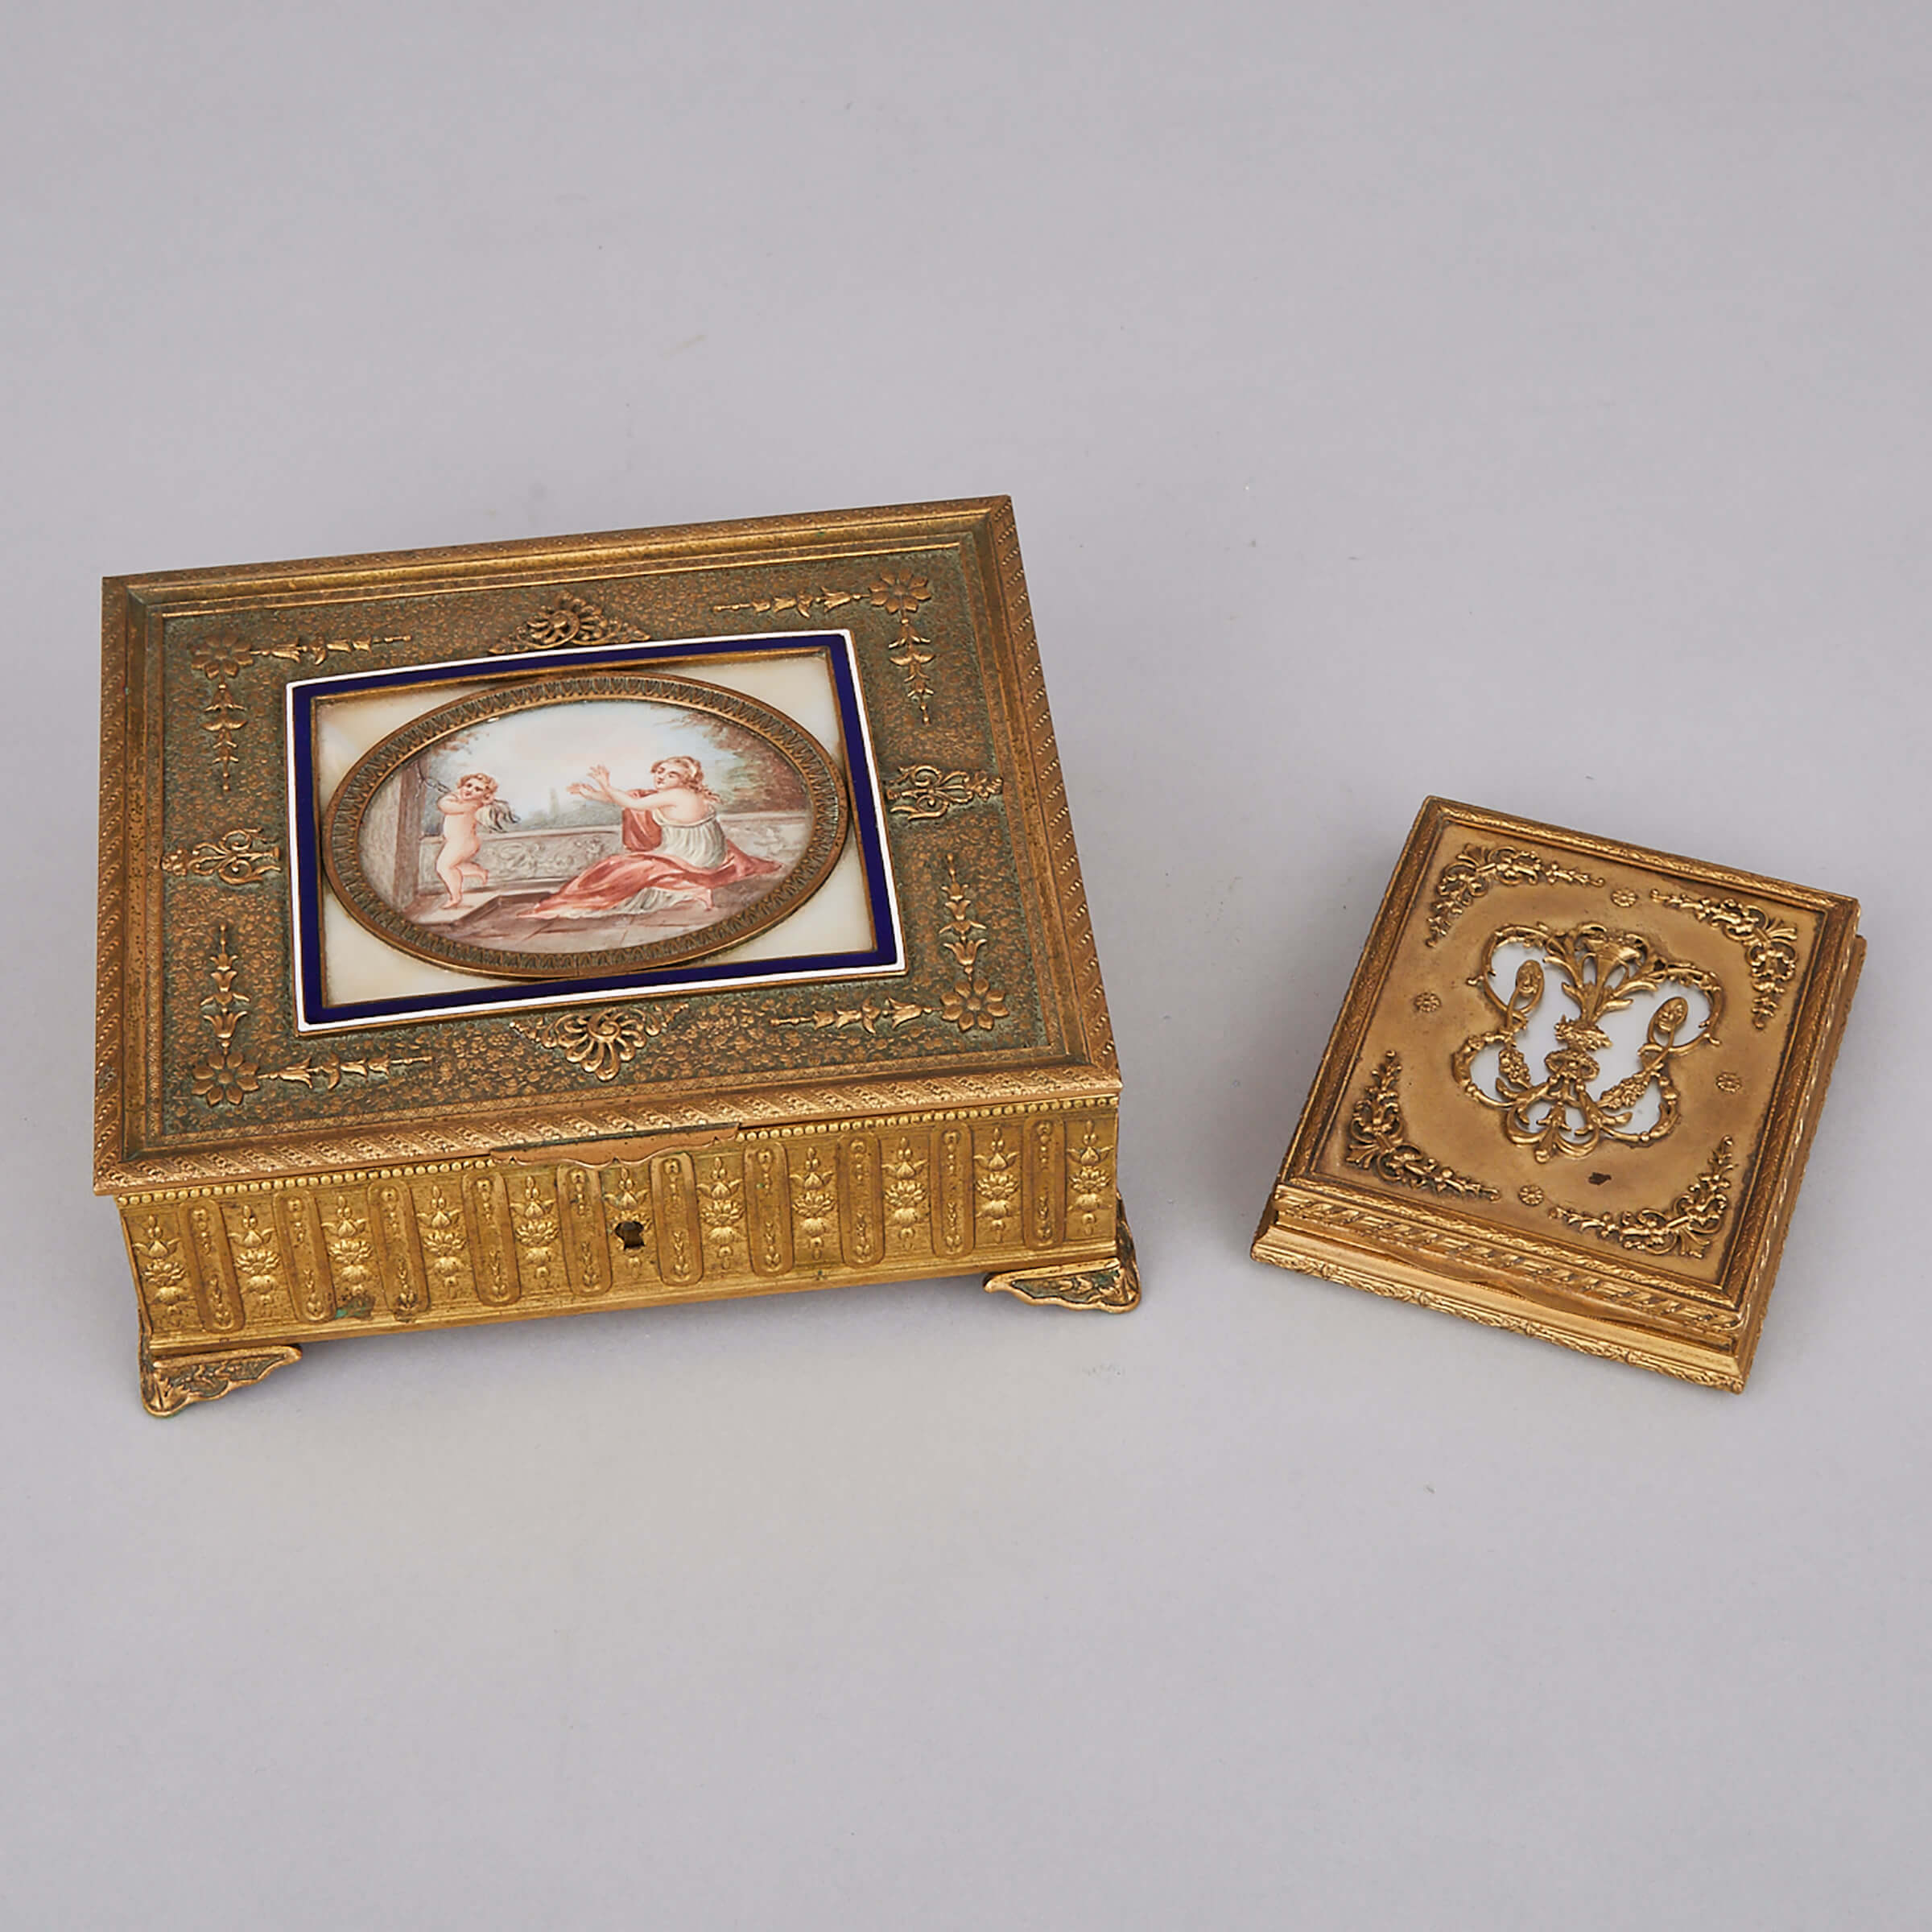 French Ormolu Jewellery Casket and Travelling Picture Case, early 20th century